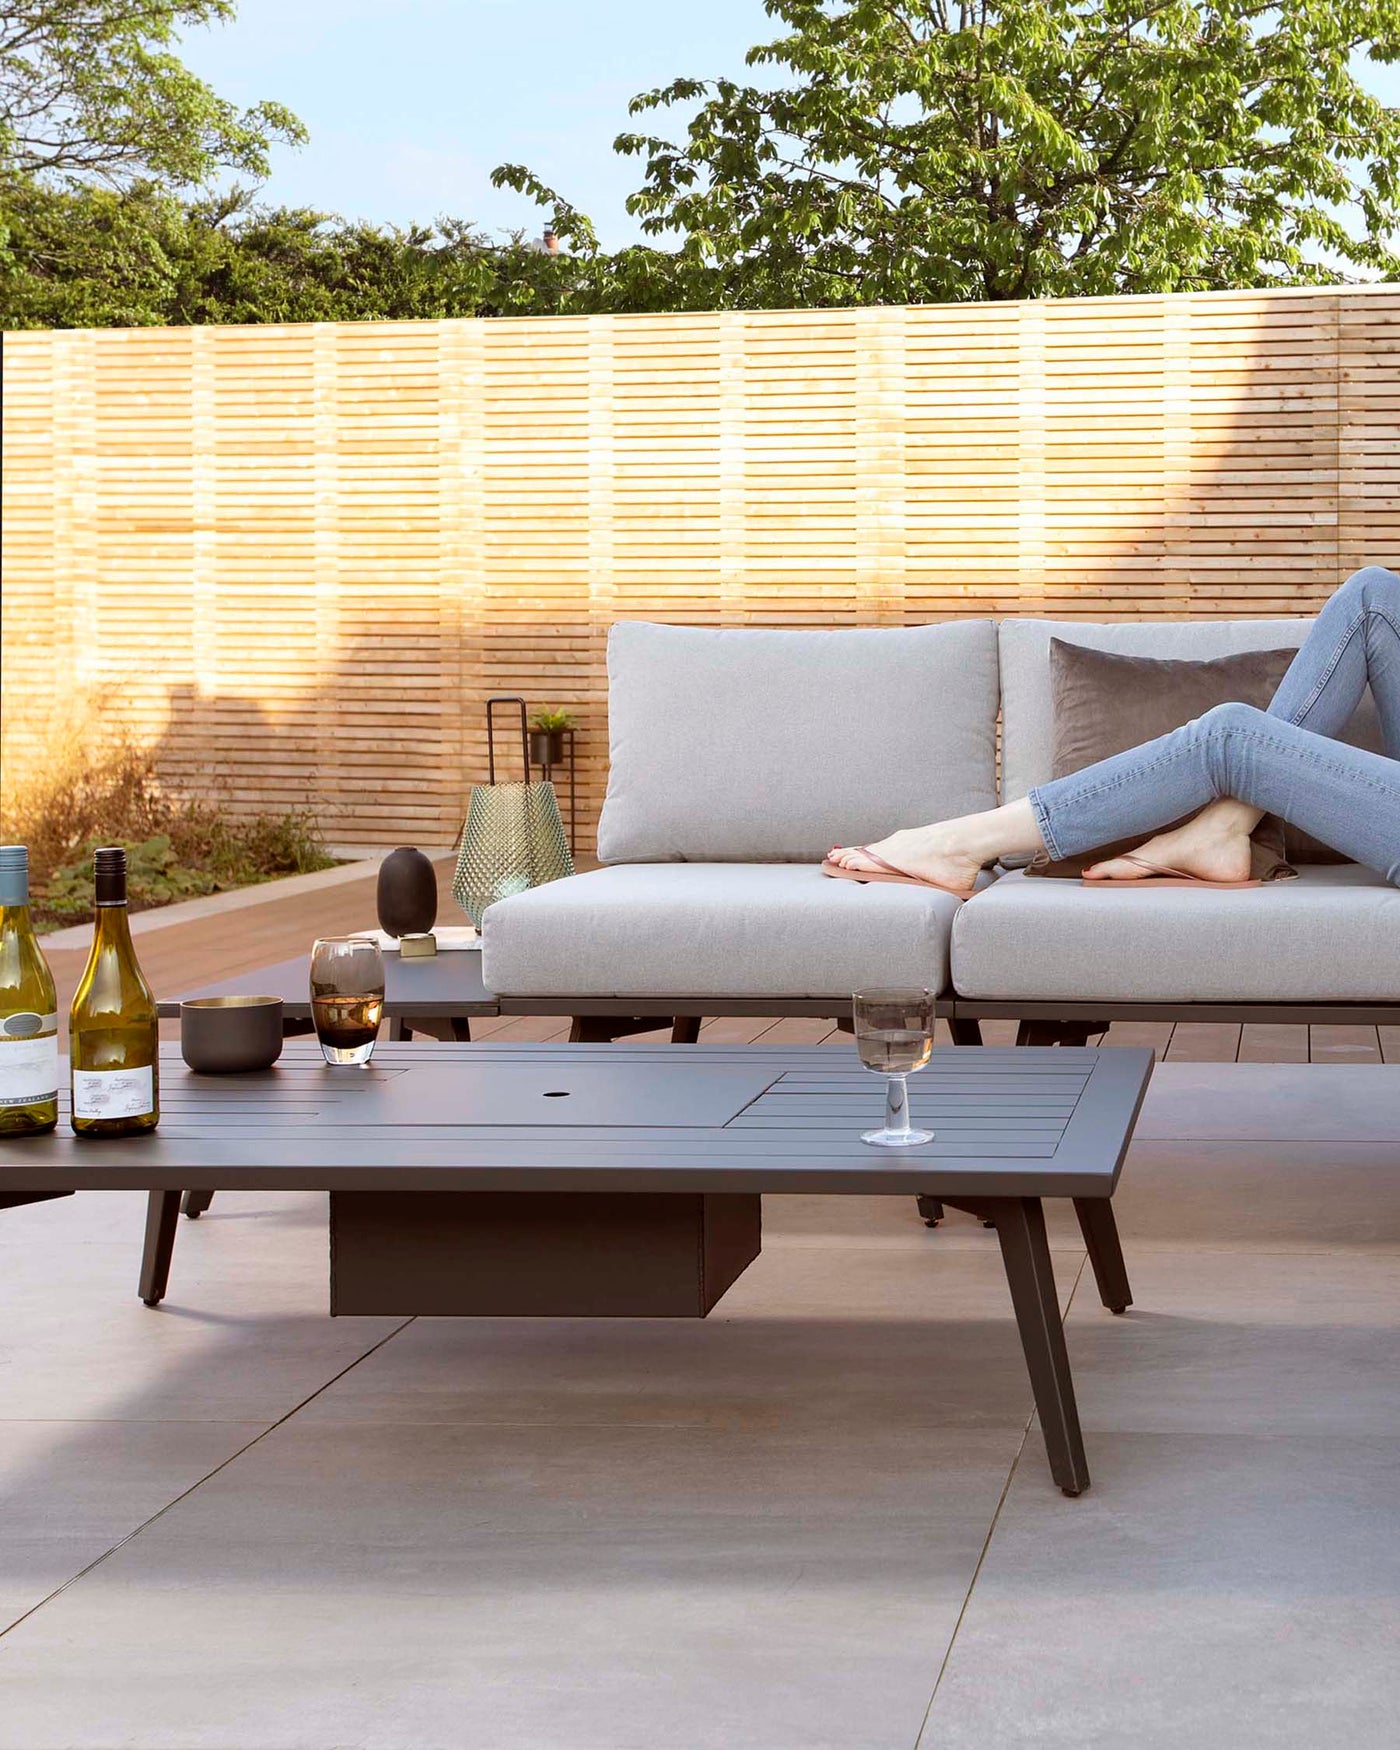 Modern outdoor furniture set featuring a charcoal grey, rectangular, low-profile coffee table and a matching corner sectional sofa with light grey cushions. The sofa's clean lines and minimalist design convey a contemporary aesthetic suitable for patios and outdoor lounging areas.